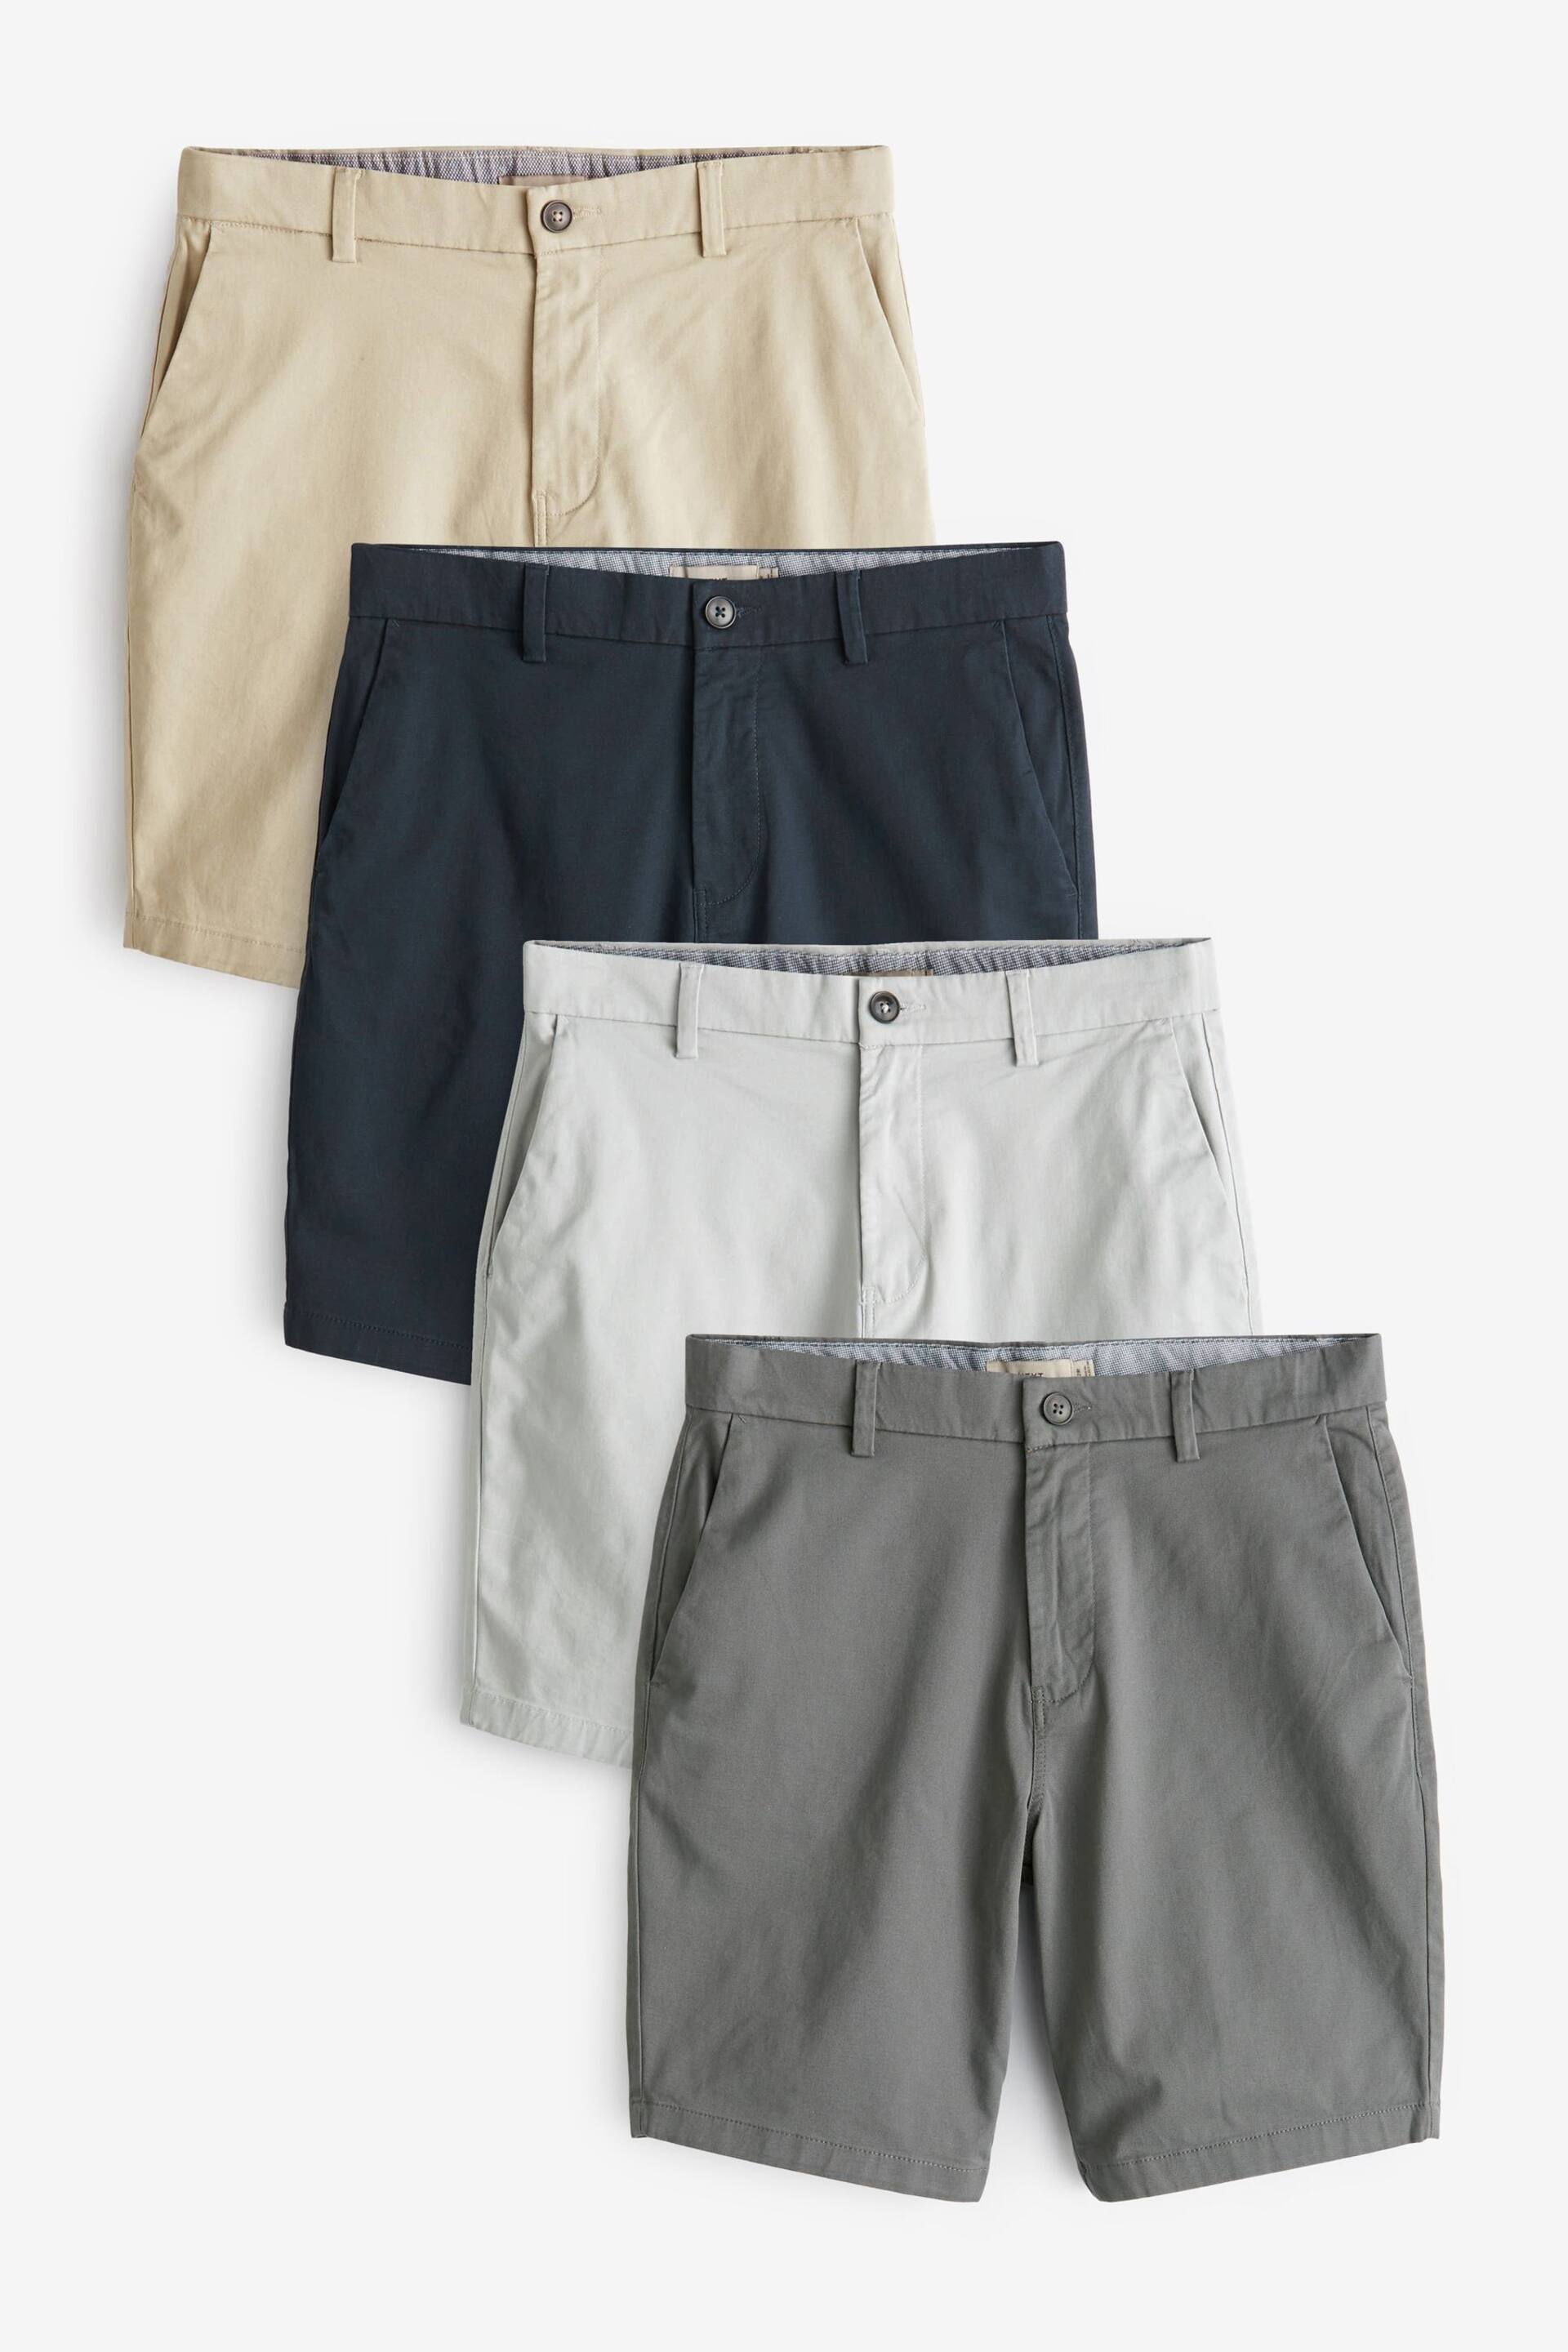 Multi Straight Fit Stretch Chino Shorts 4 Pack - Image 1 of 11